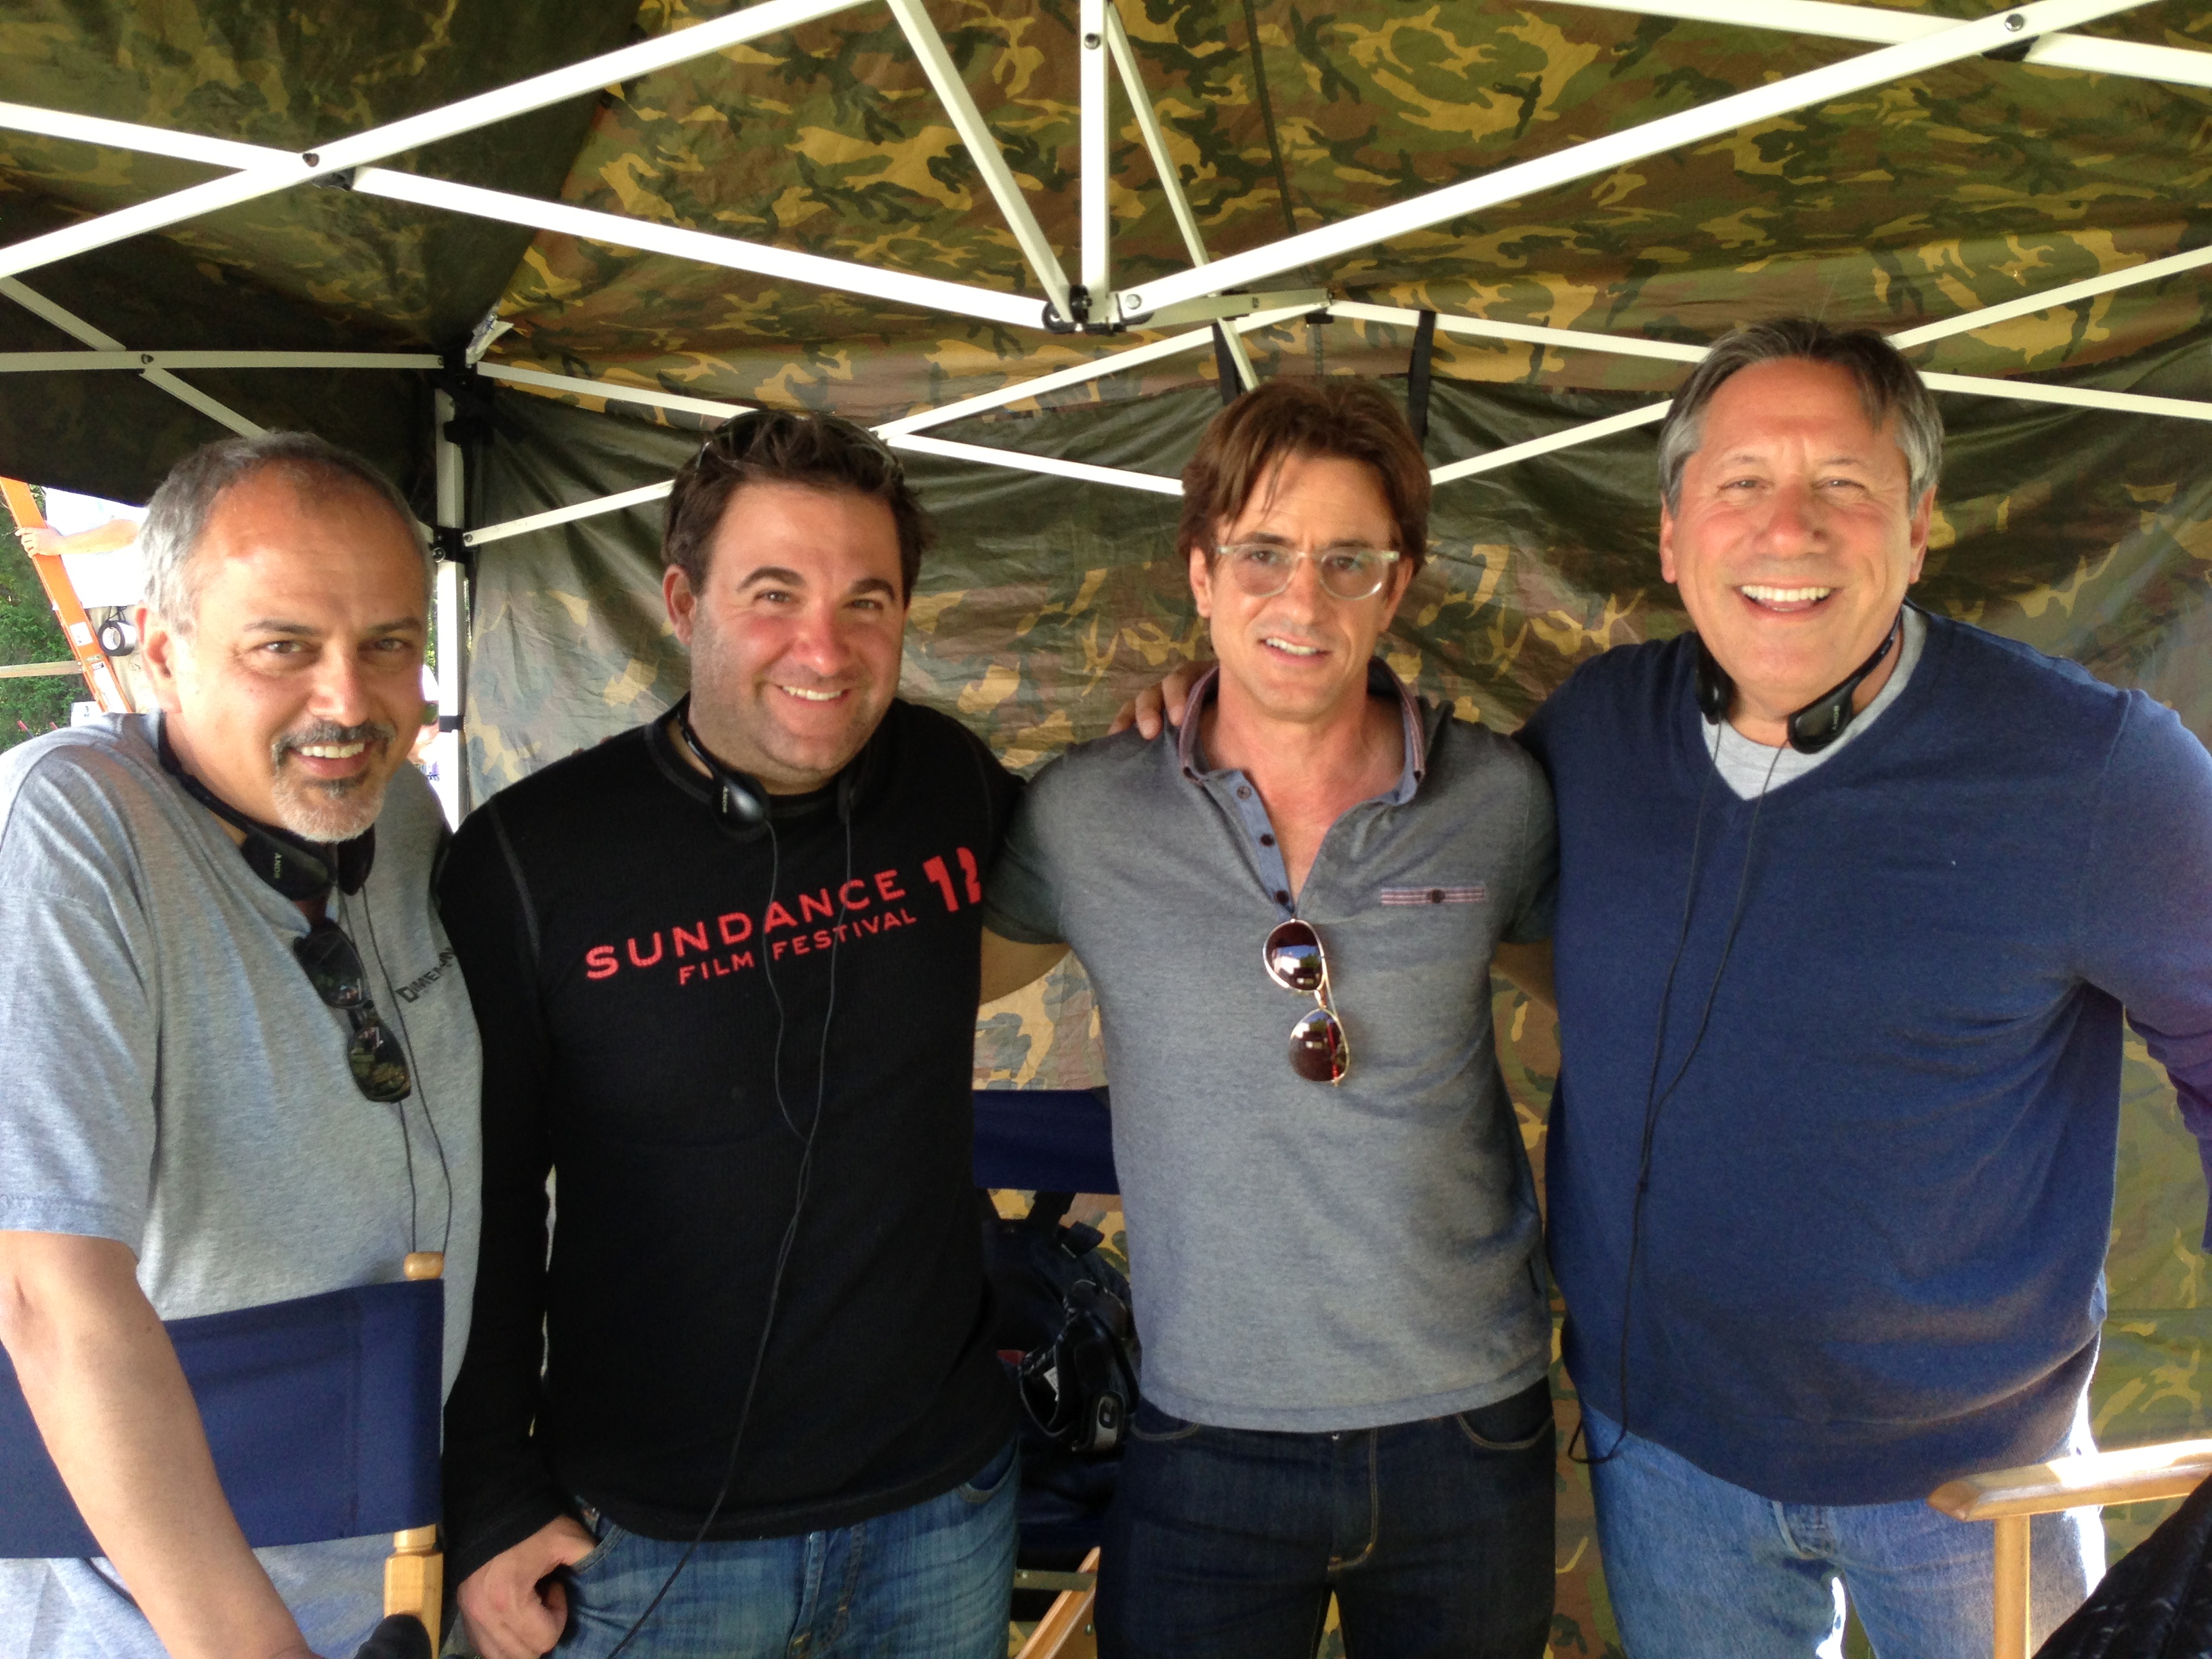 Michael Helfant, Bradley Gallo, Dermot Mulroney and Robert Stein on the set of Careful What You Wish For